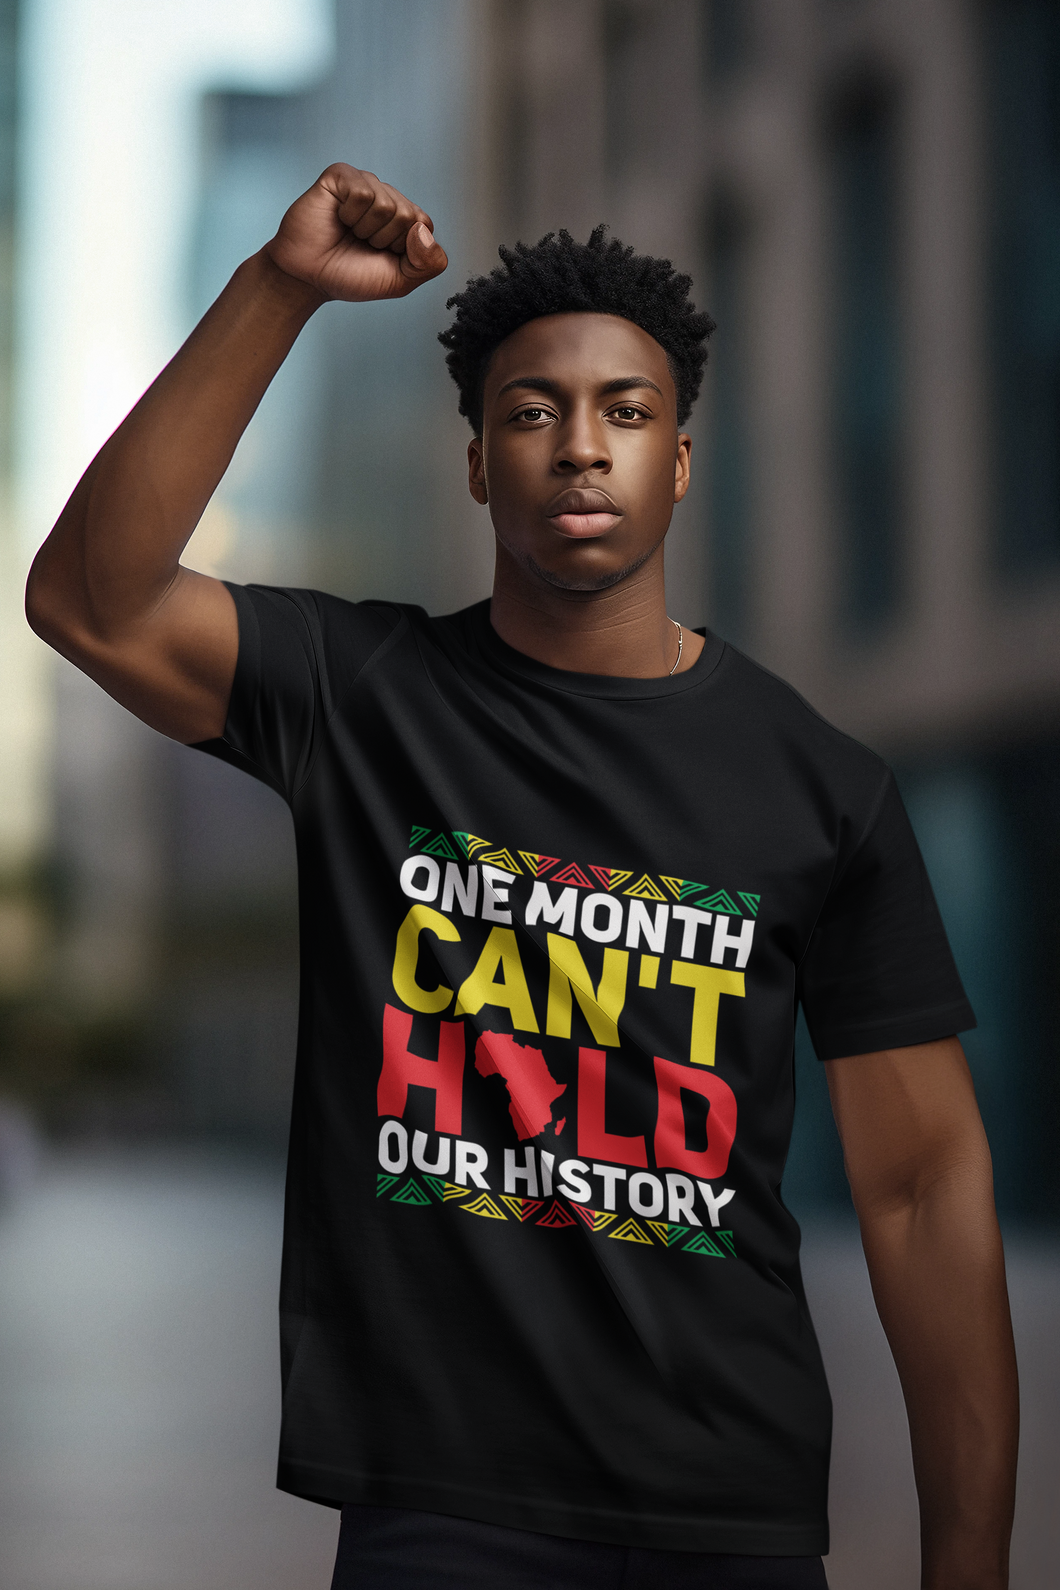 One month can't hold our History DTF